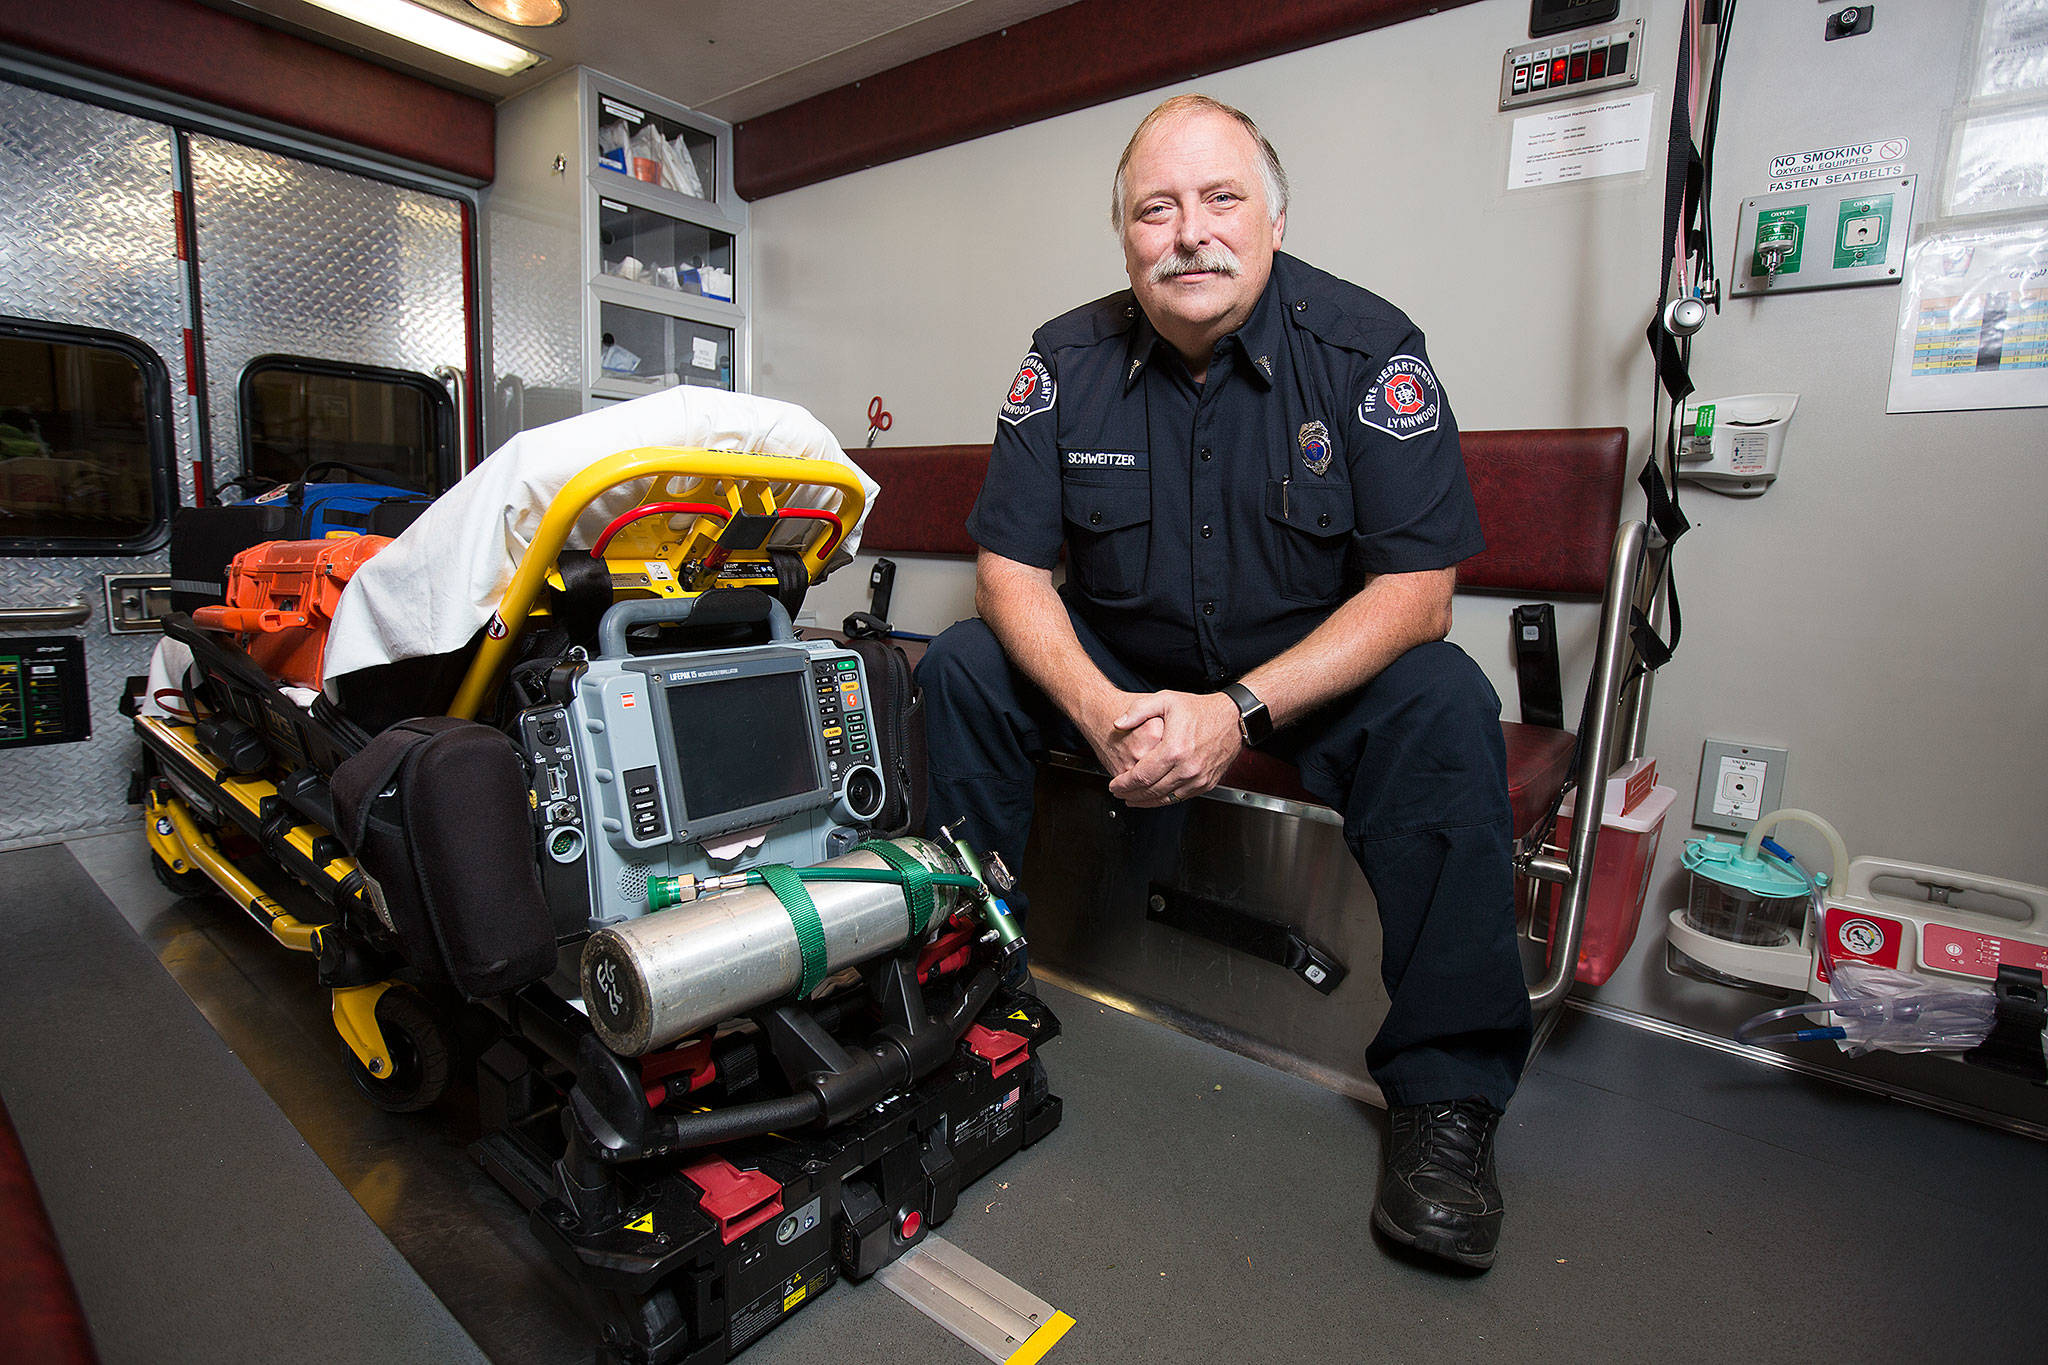 Lynnwood Fire Department paramedic Vincent Schweitzer, 61, poses in the paramedic unit at Station 15 on July 27 in Lynnwood. Schweitzer is the last paramedic still on the job from a starting group of seven in south Snohomish County. (Andy Bronson / The Herald)